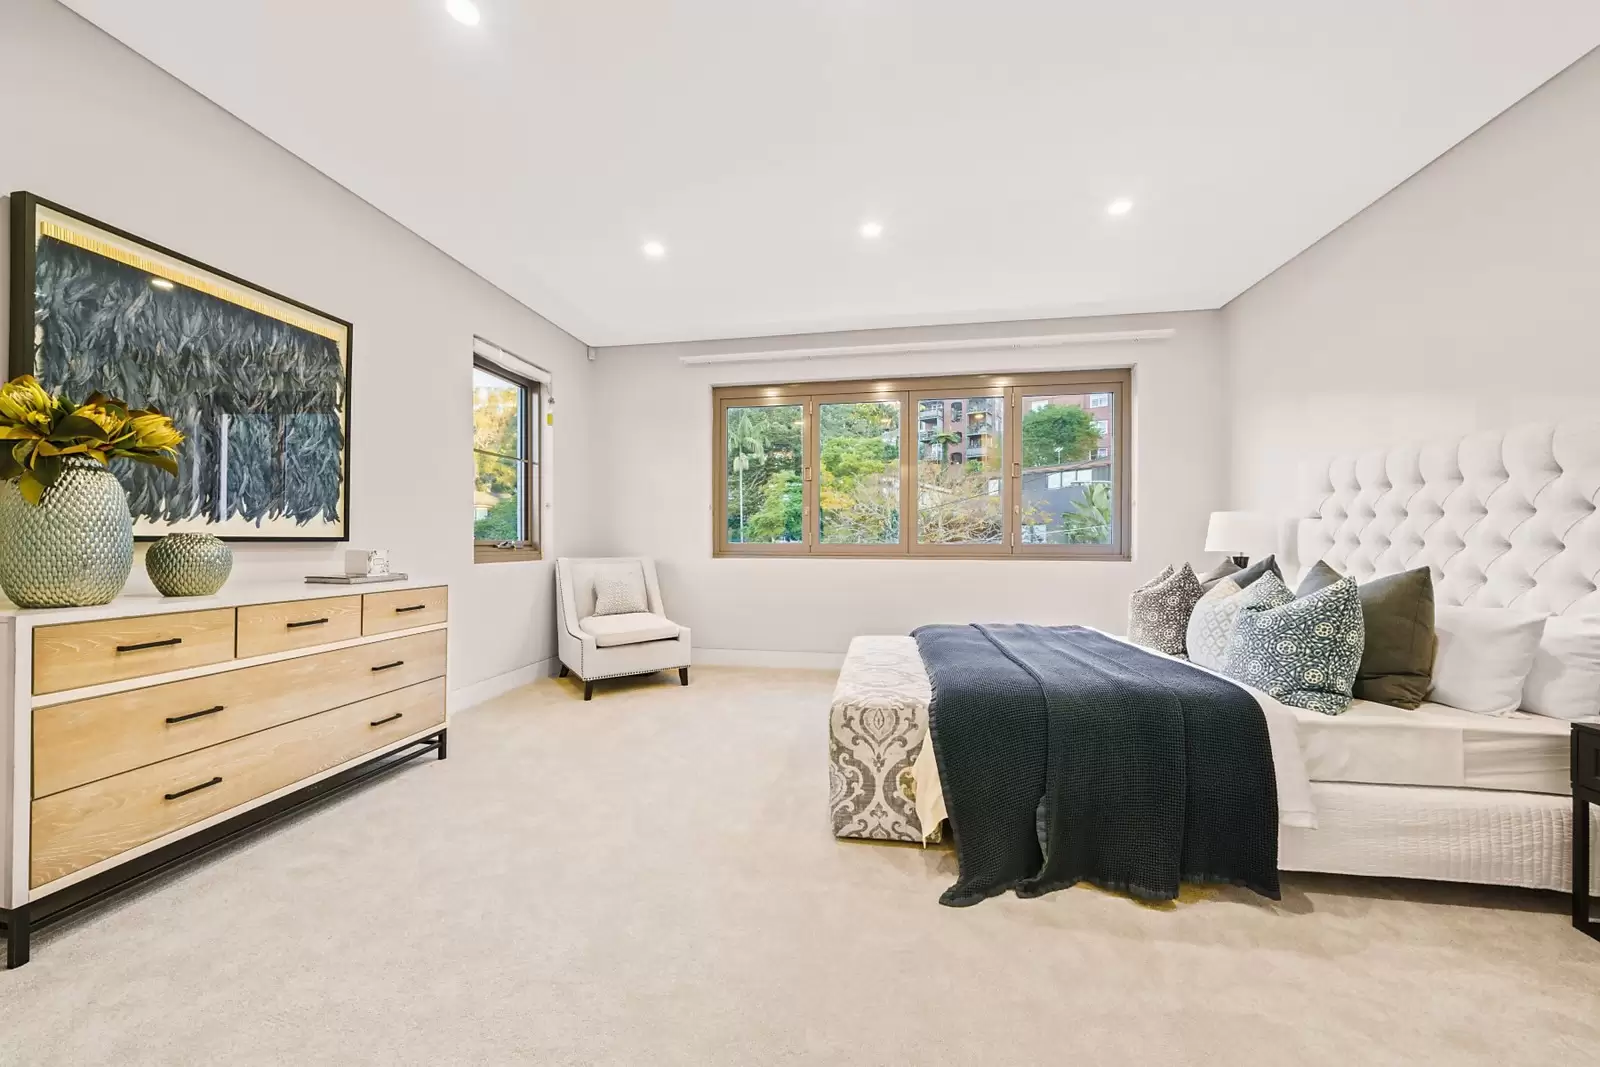 Photo #8: 5 Milton Avenue, Woollahra - Sold by Sydney Sotheby's International Realty